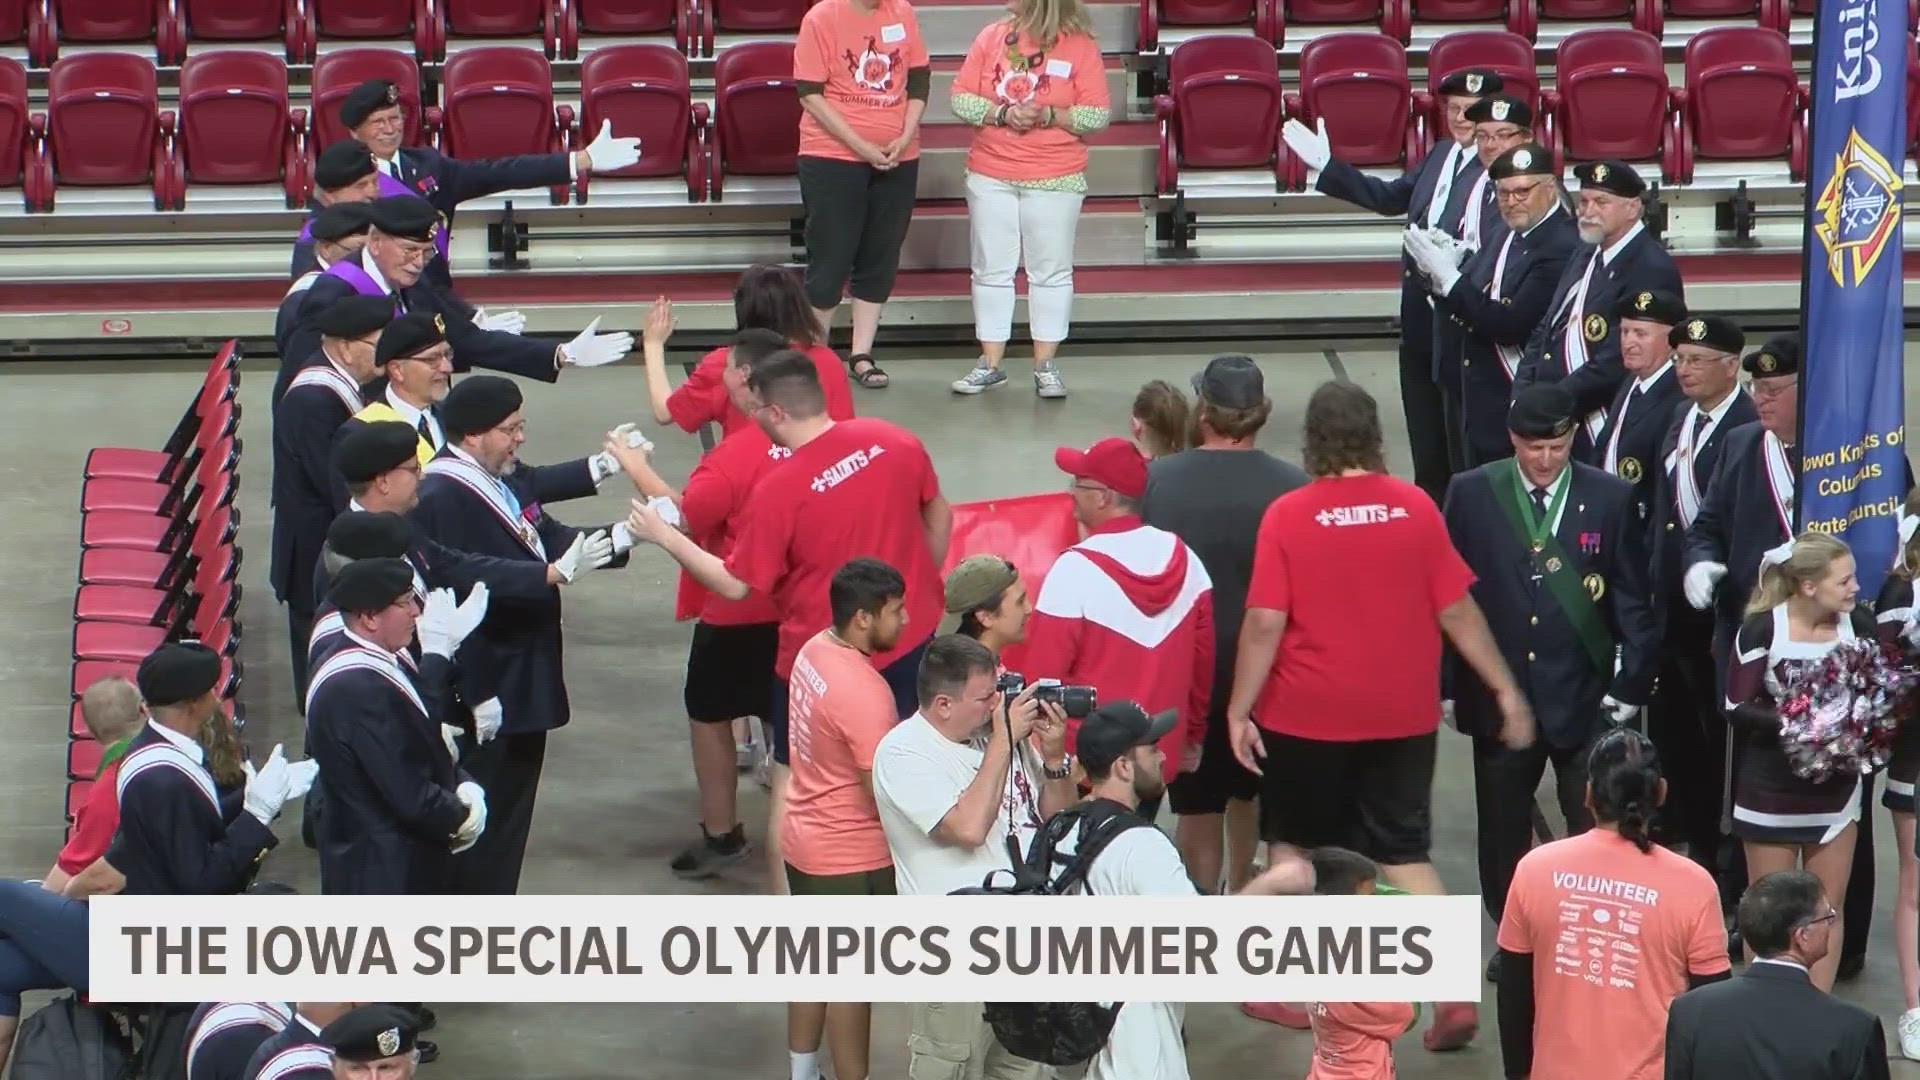 With more than 2400 athletes, 1400 coaches and 1200 volunteers, plenty of people are showing up and showing out at the 2023 Iowa Special Olympics 2023 Summer Games.